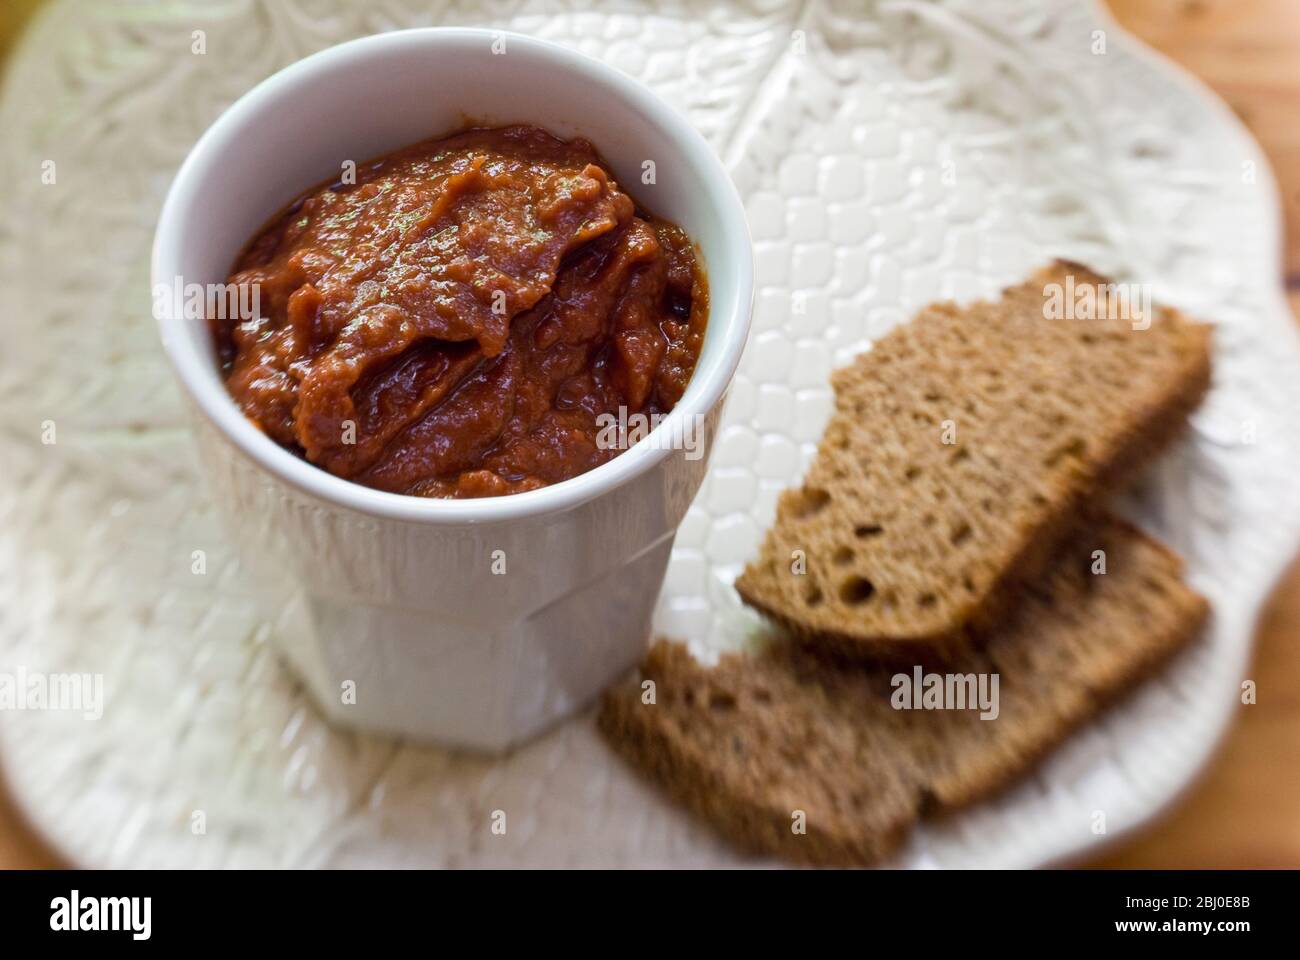 White pot of sundried tomato pate as dip with coarse rye bread. - Stock Photo